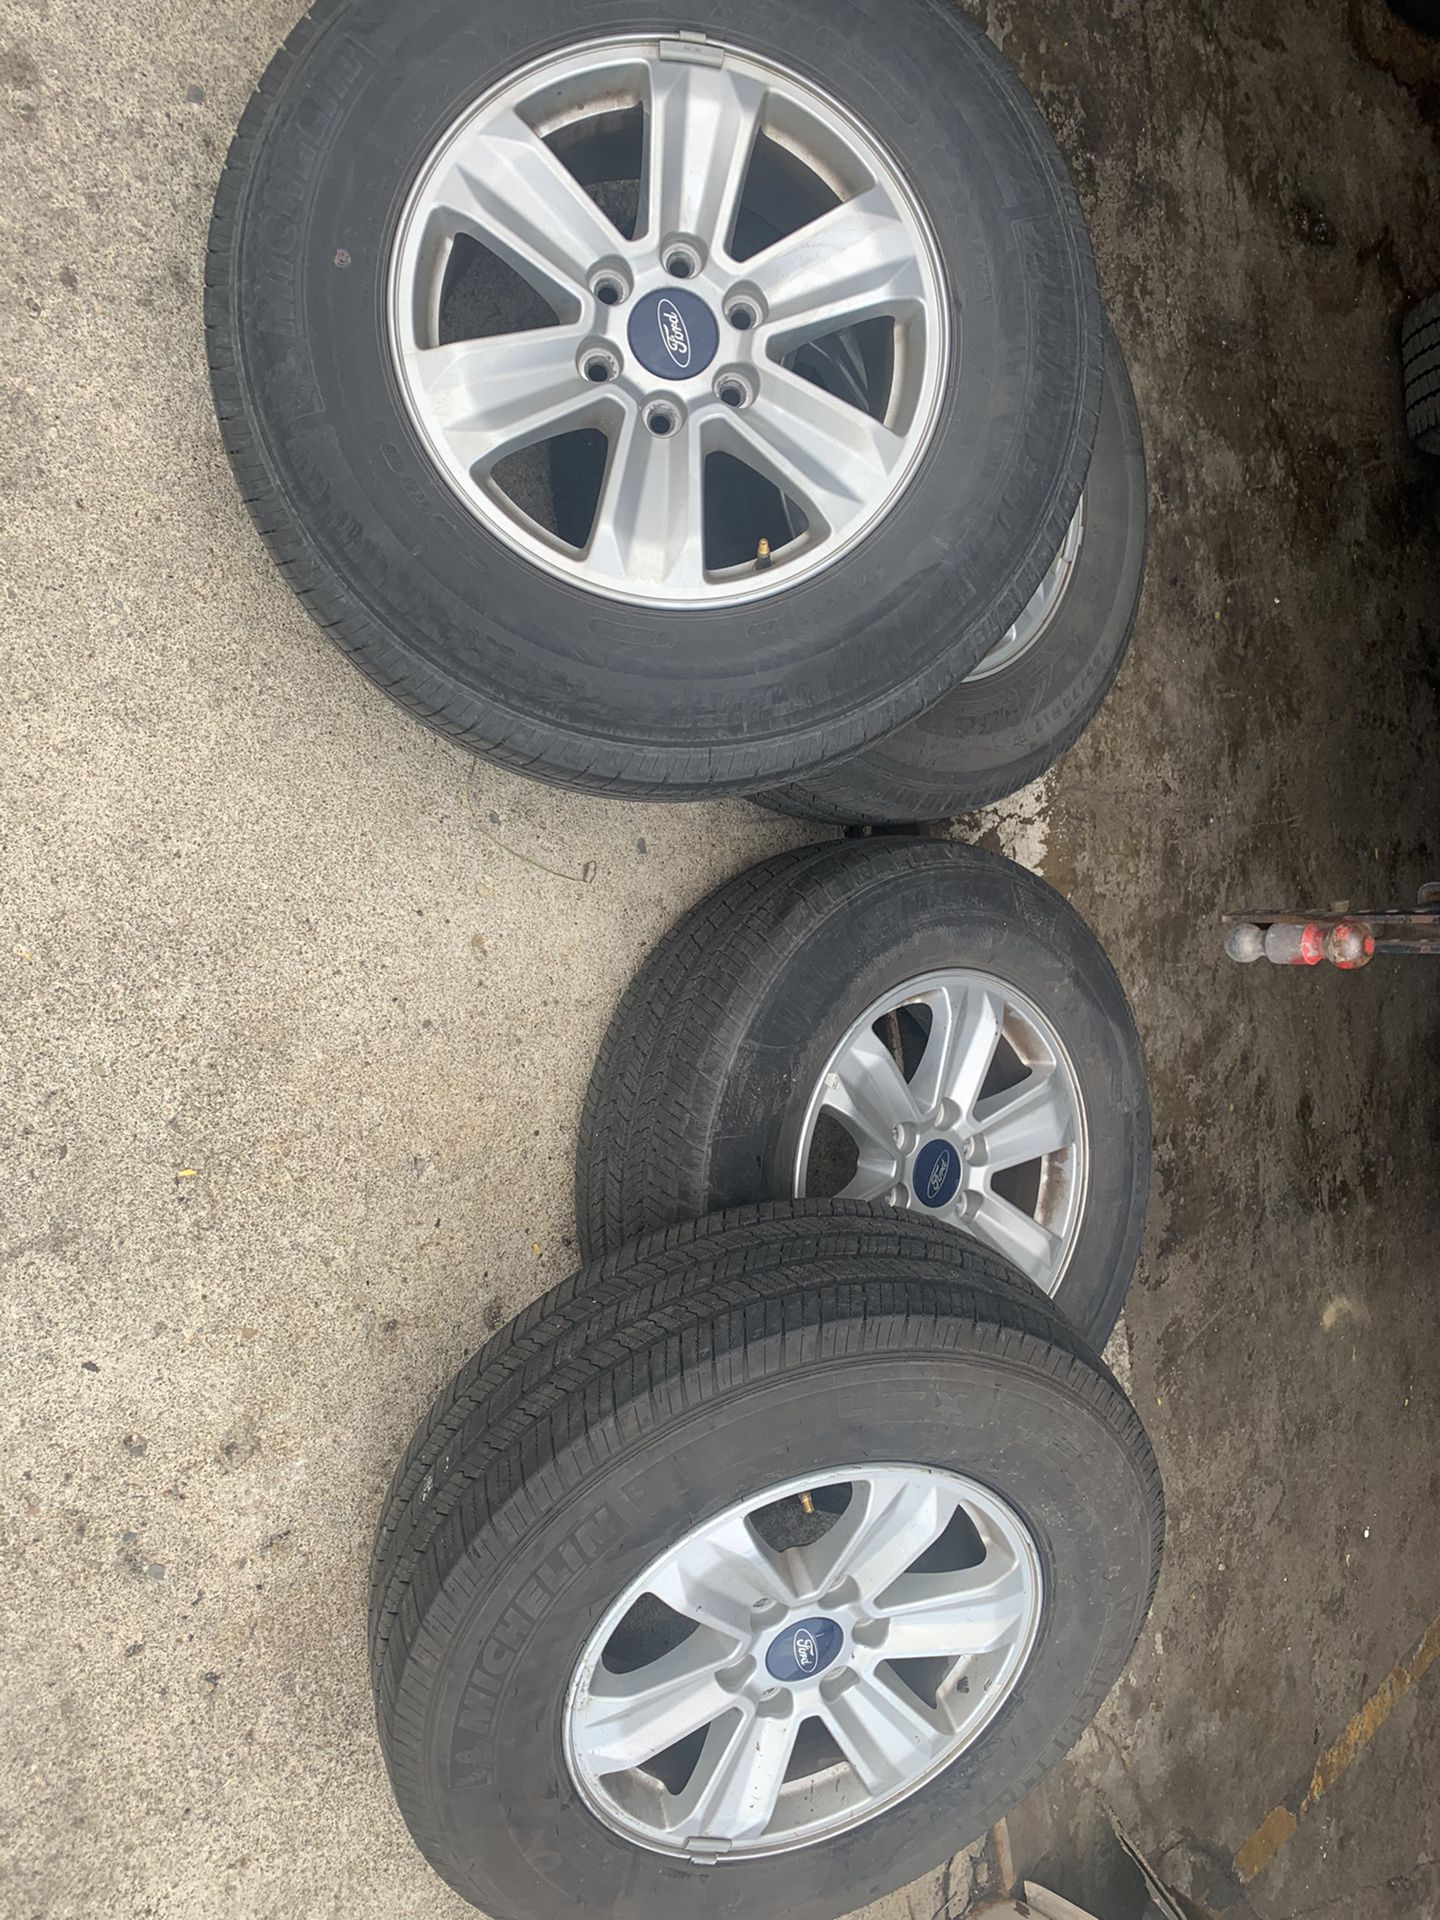 Ford 17” rims